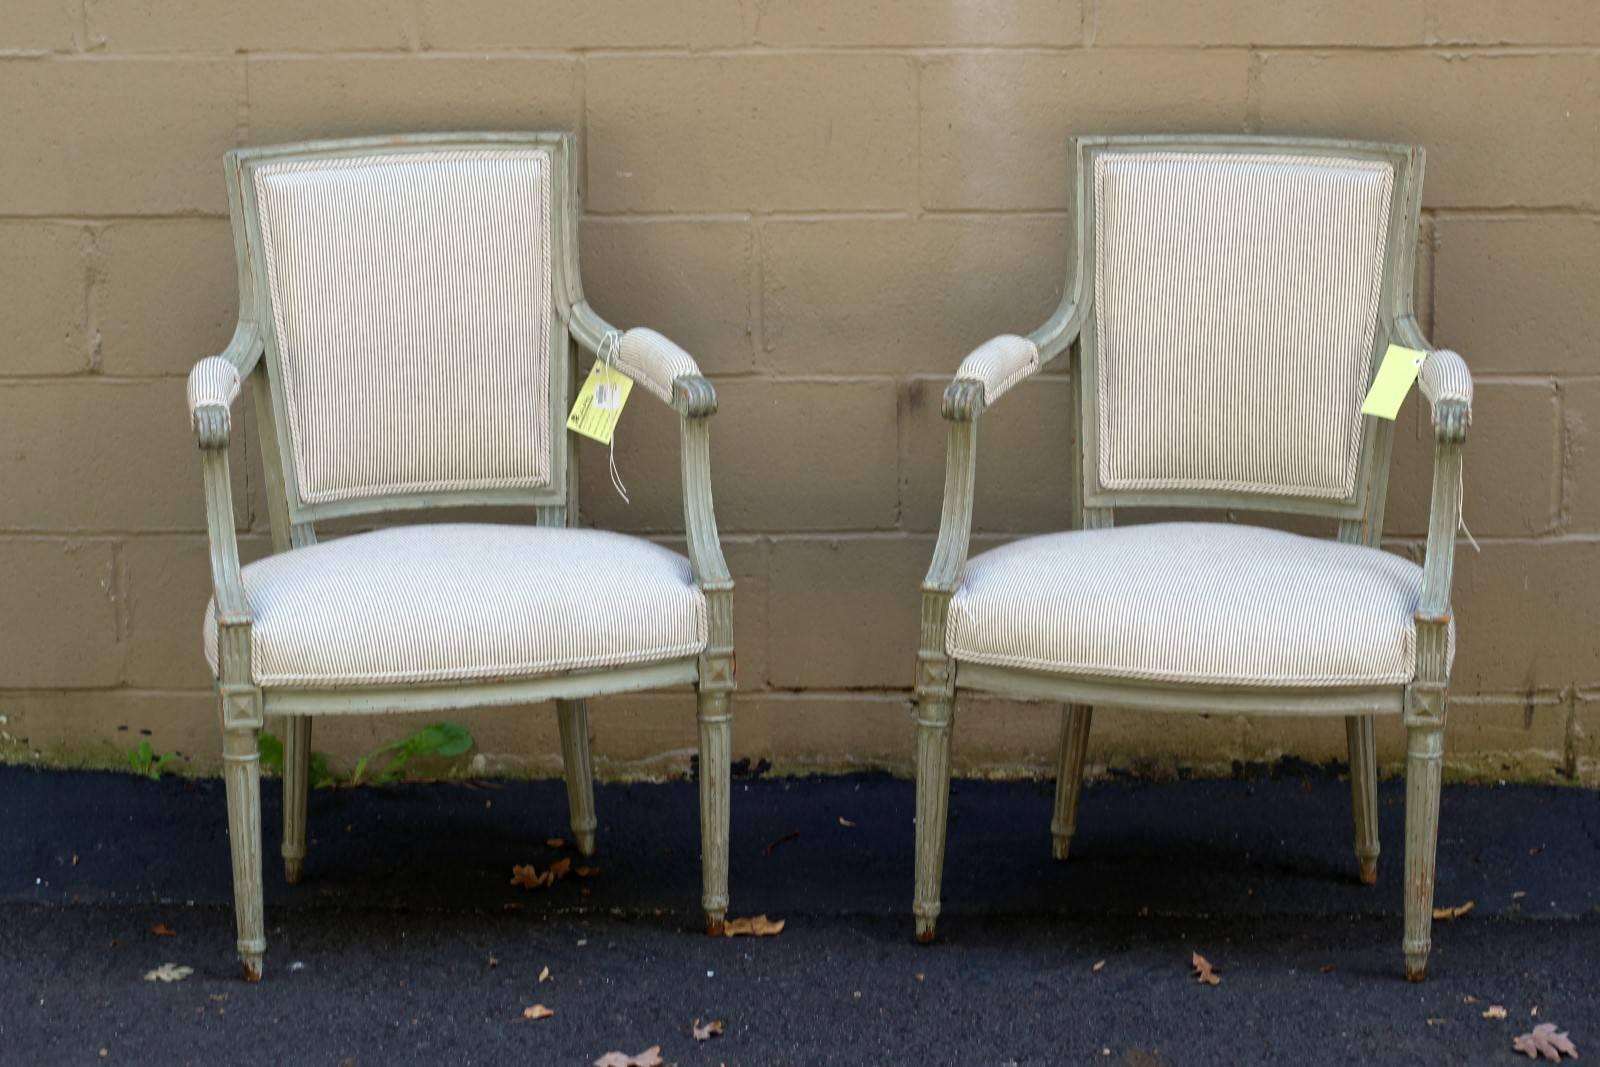 Pair of 1920s French Louis XVI style painted armchairs with double welt cotton upholstery, scrolled arms, square backs and fluted legs. We love the stately and classic lines of these impressive, Louis XVI-inspired square-backed chairs, painted in a